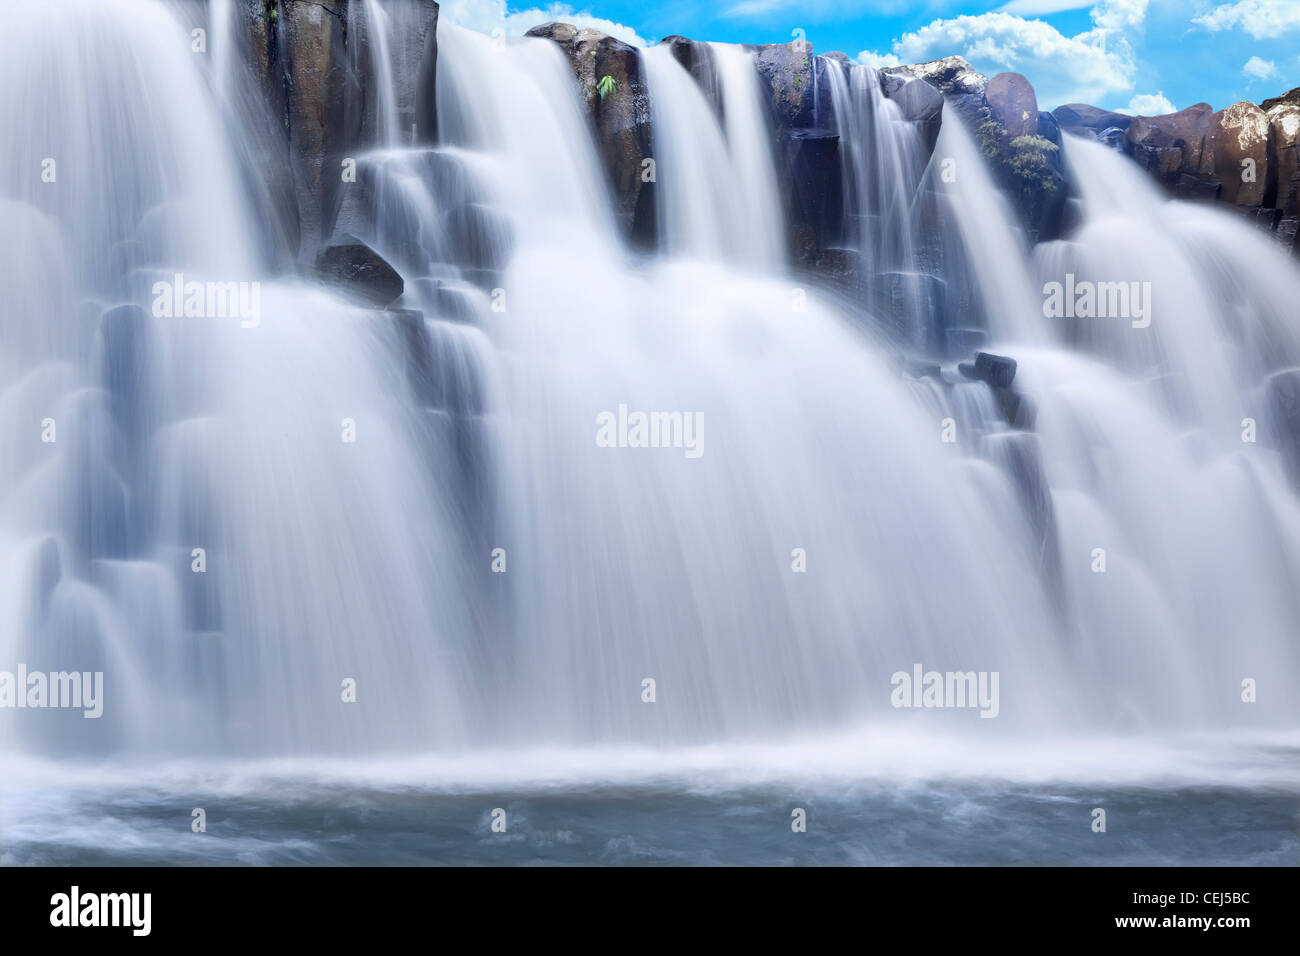 Beautiful waterfall with clear blue sky in background Stock Photo